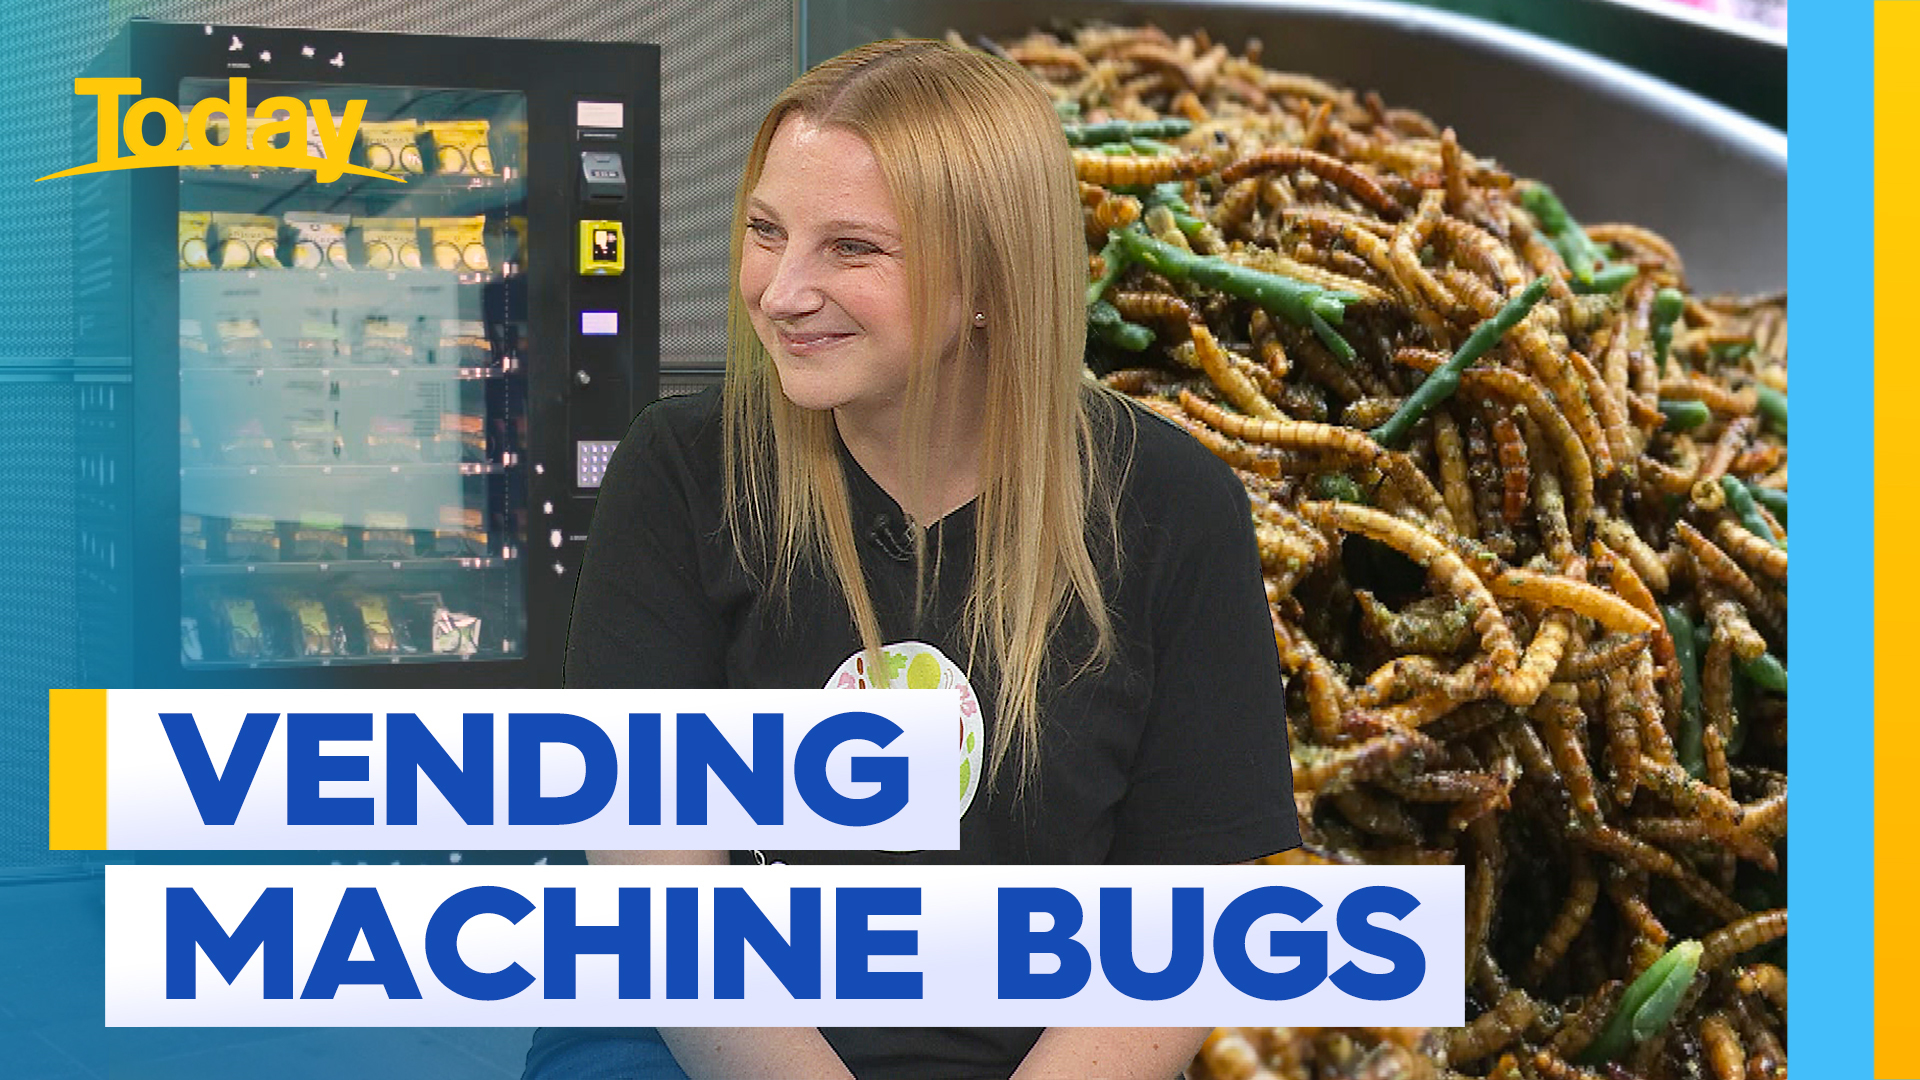 Melbourne vending machines selling edible bugs